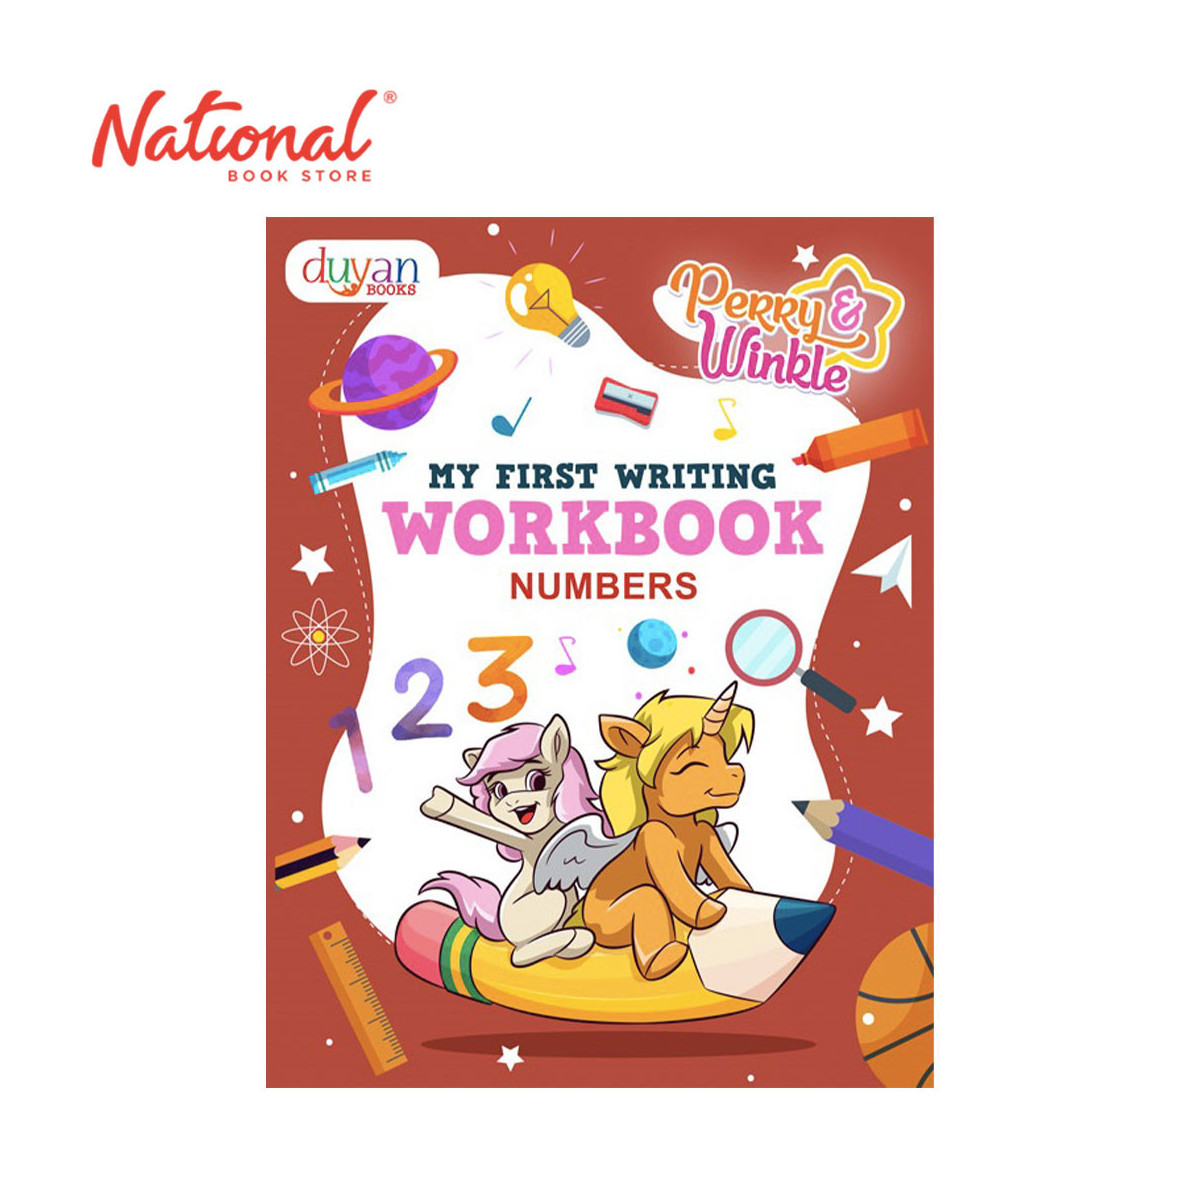 My First Writing Workbook: Numbers - Trade Paperback - Activity Books for Kids